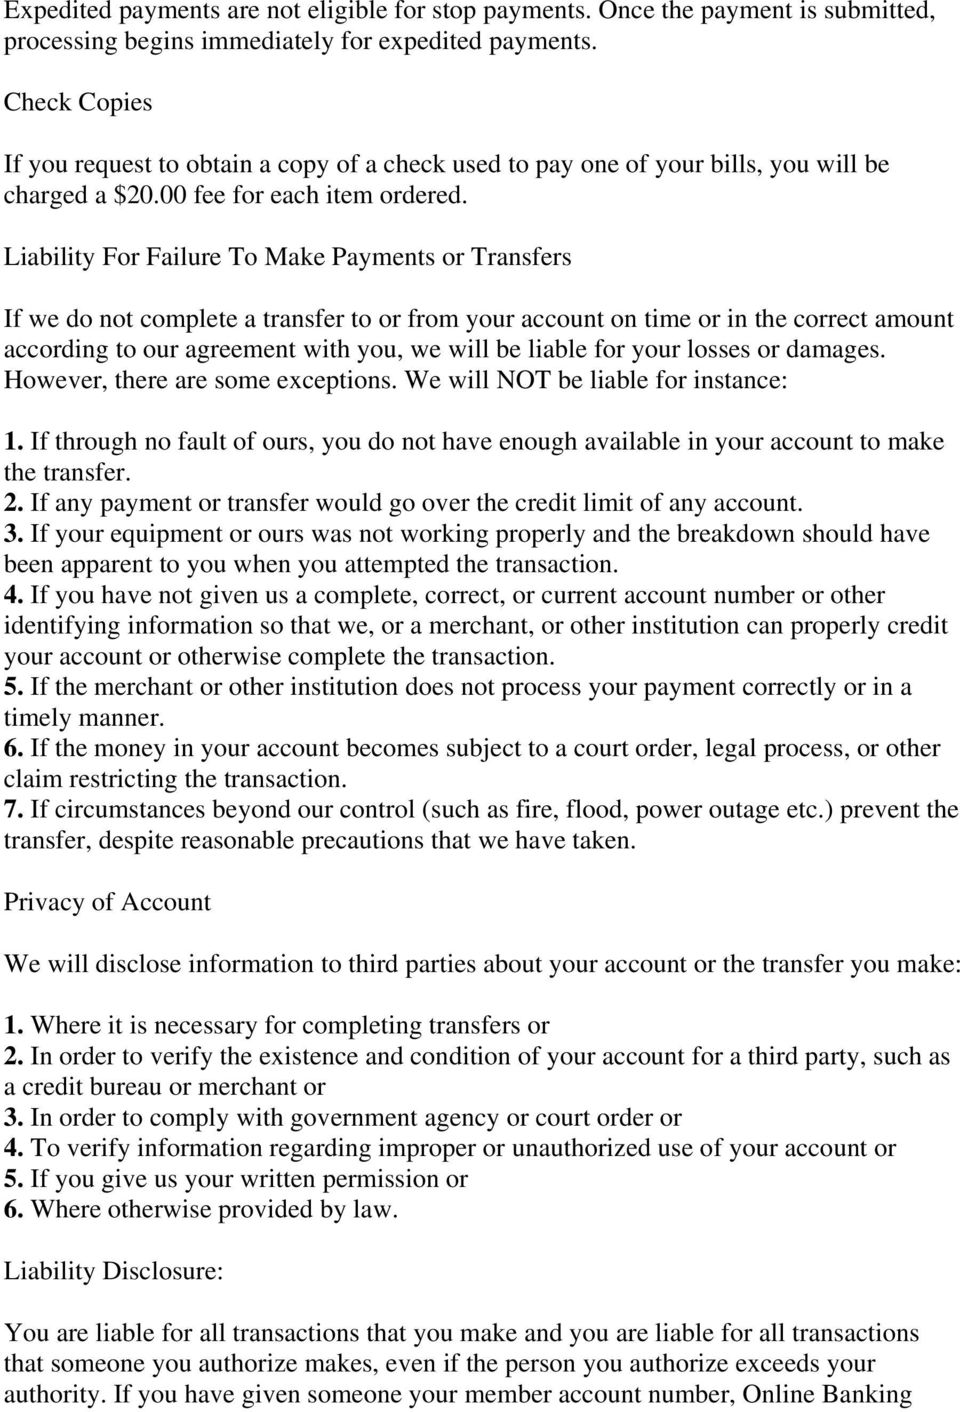 Liability For Failure To Make Payments or Transfers If we do not complete a transfer to or from your account on time or in the correct amount according to our agreement with you, we will be liable